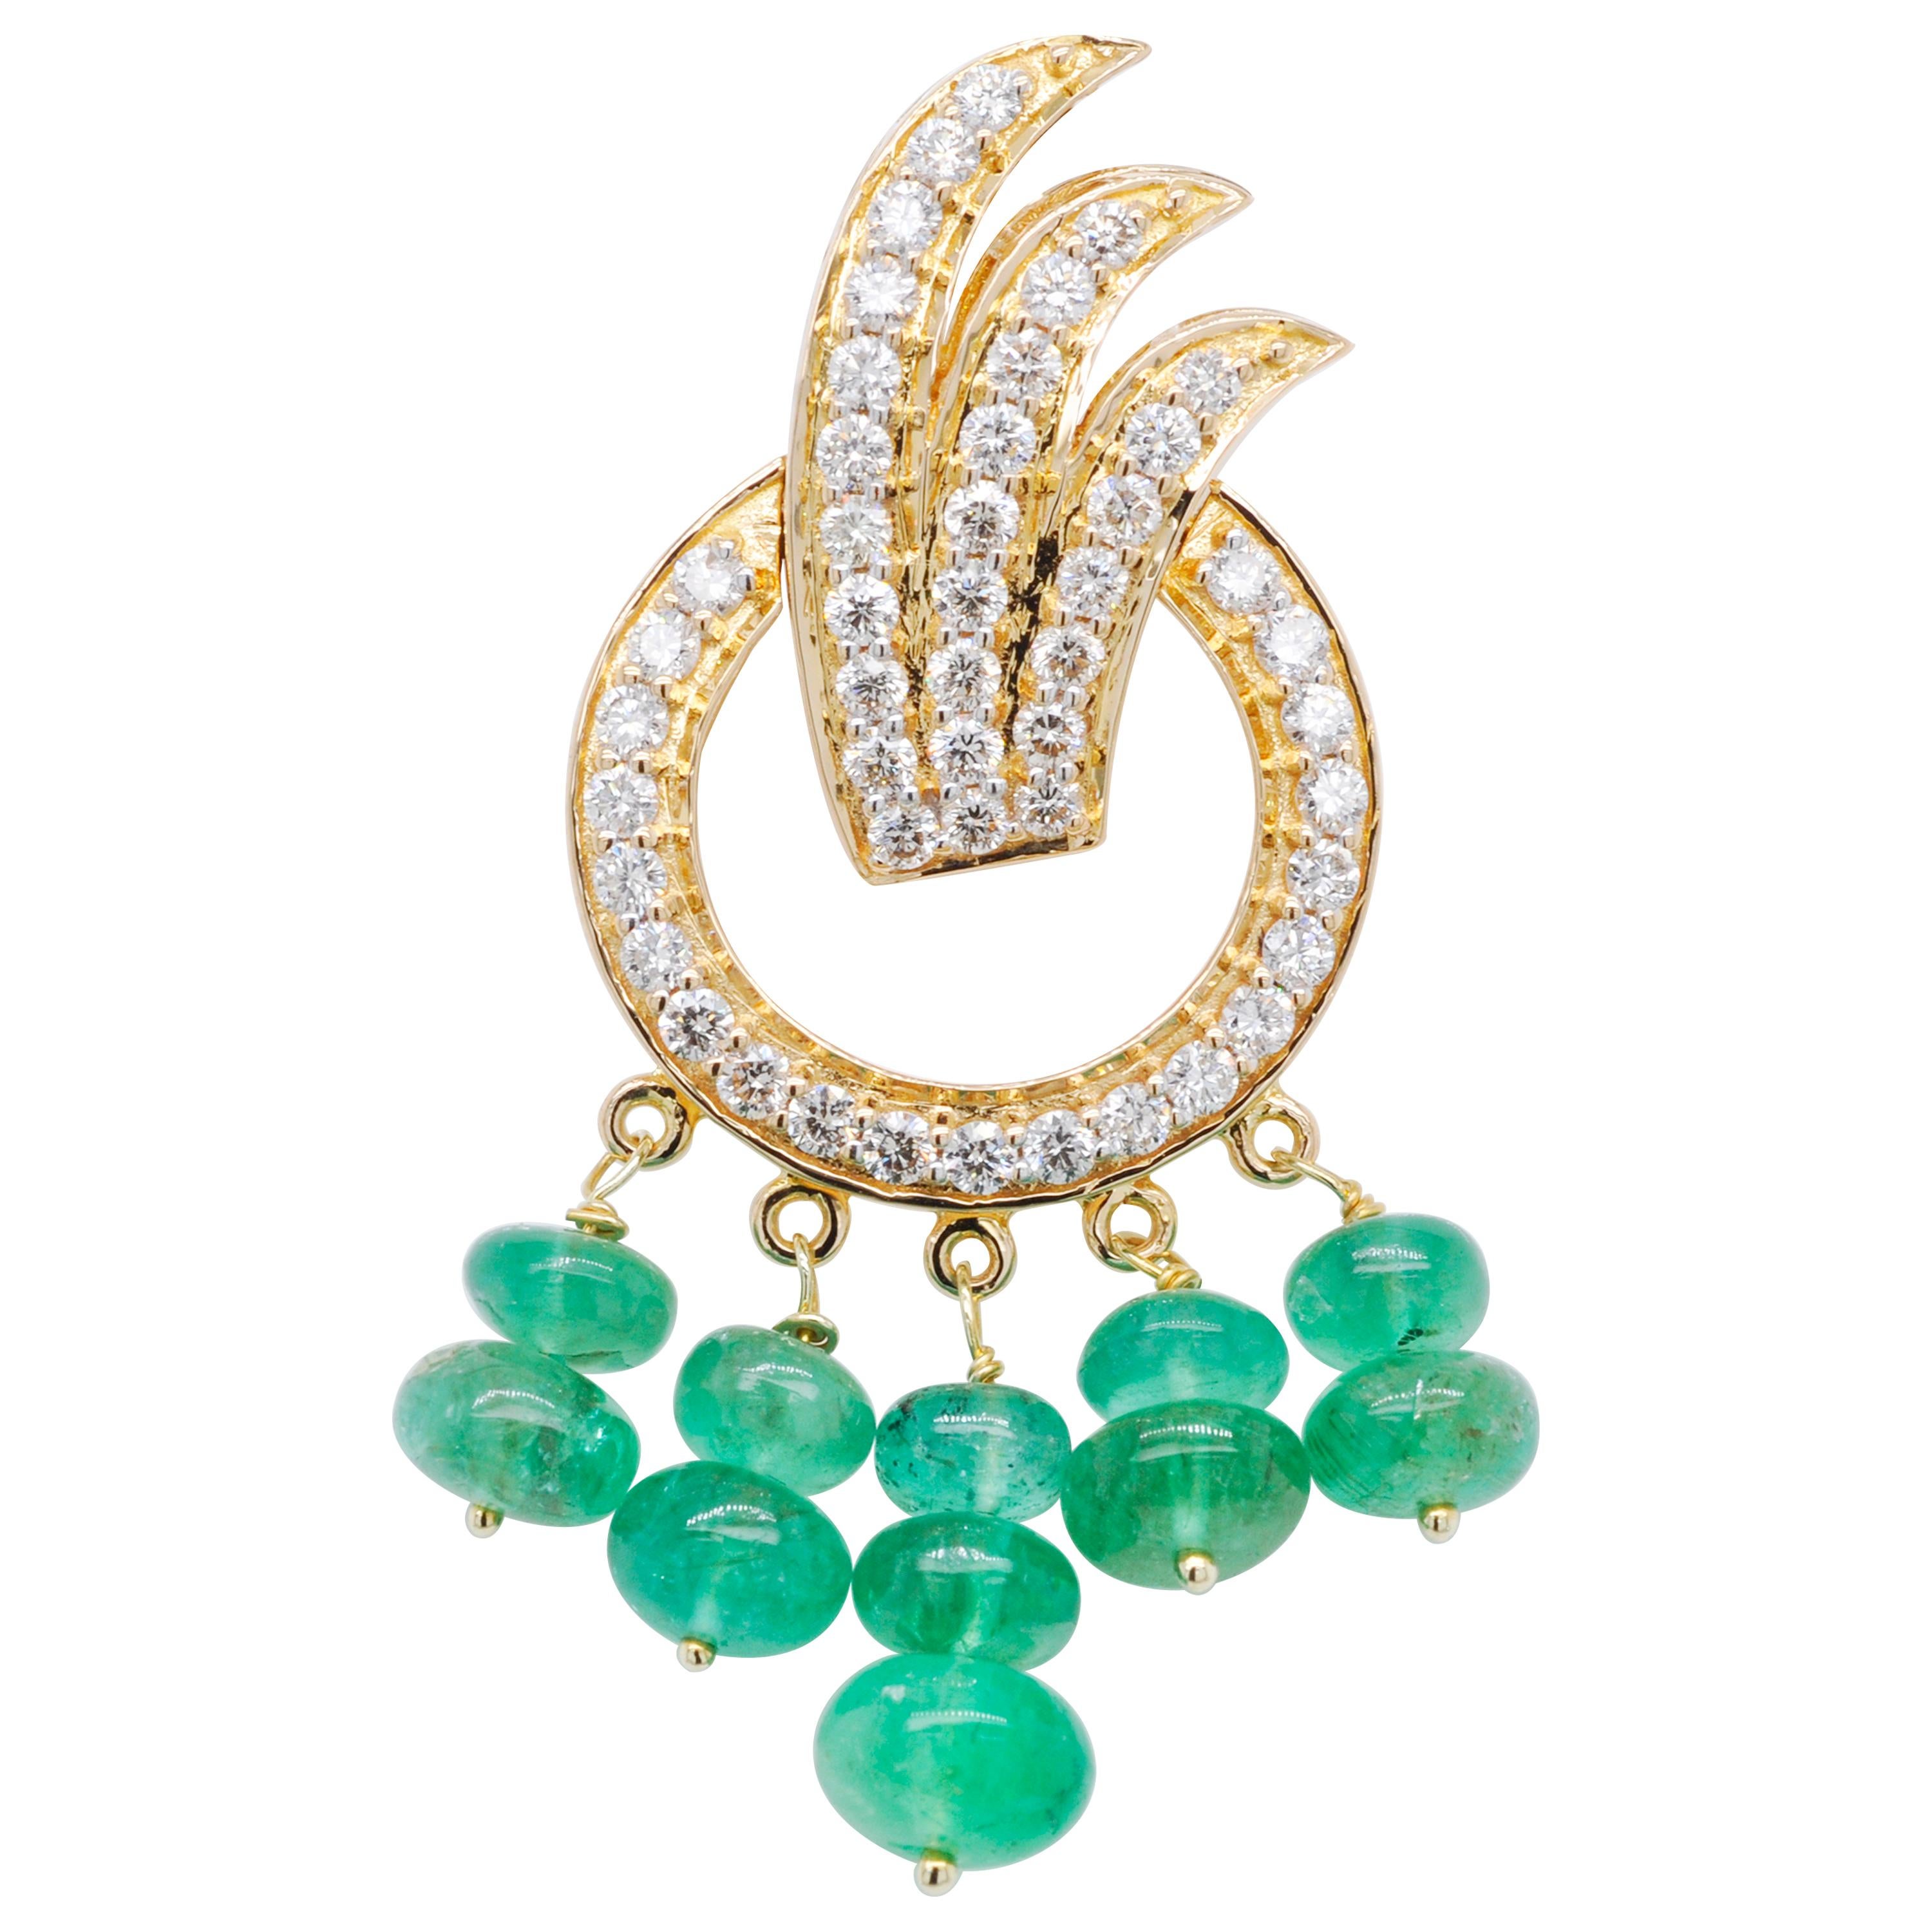 18 Karat Yellow Gold Diamond Emerald Beads Pendant Necklace Dangle Earrings Set In New Condition For Sale In Jaipur, Rajasthan